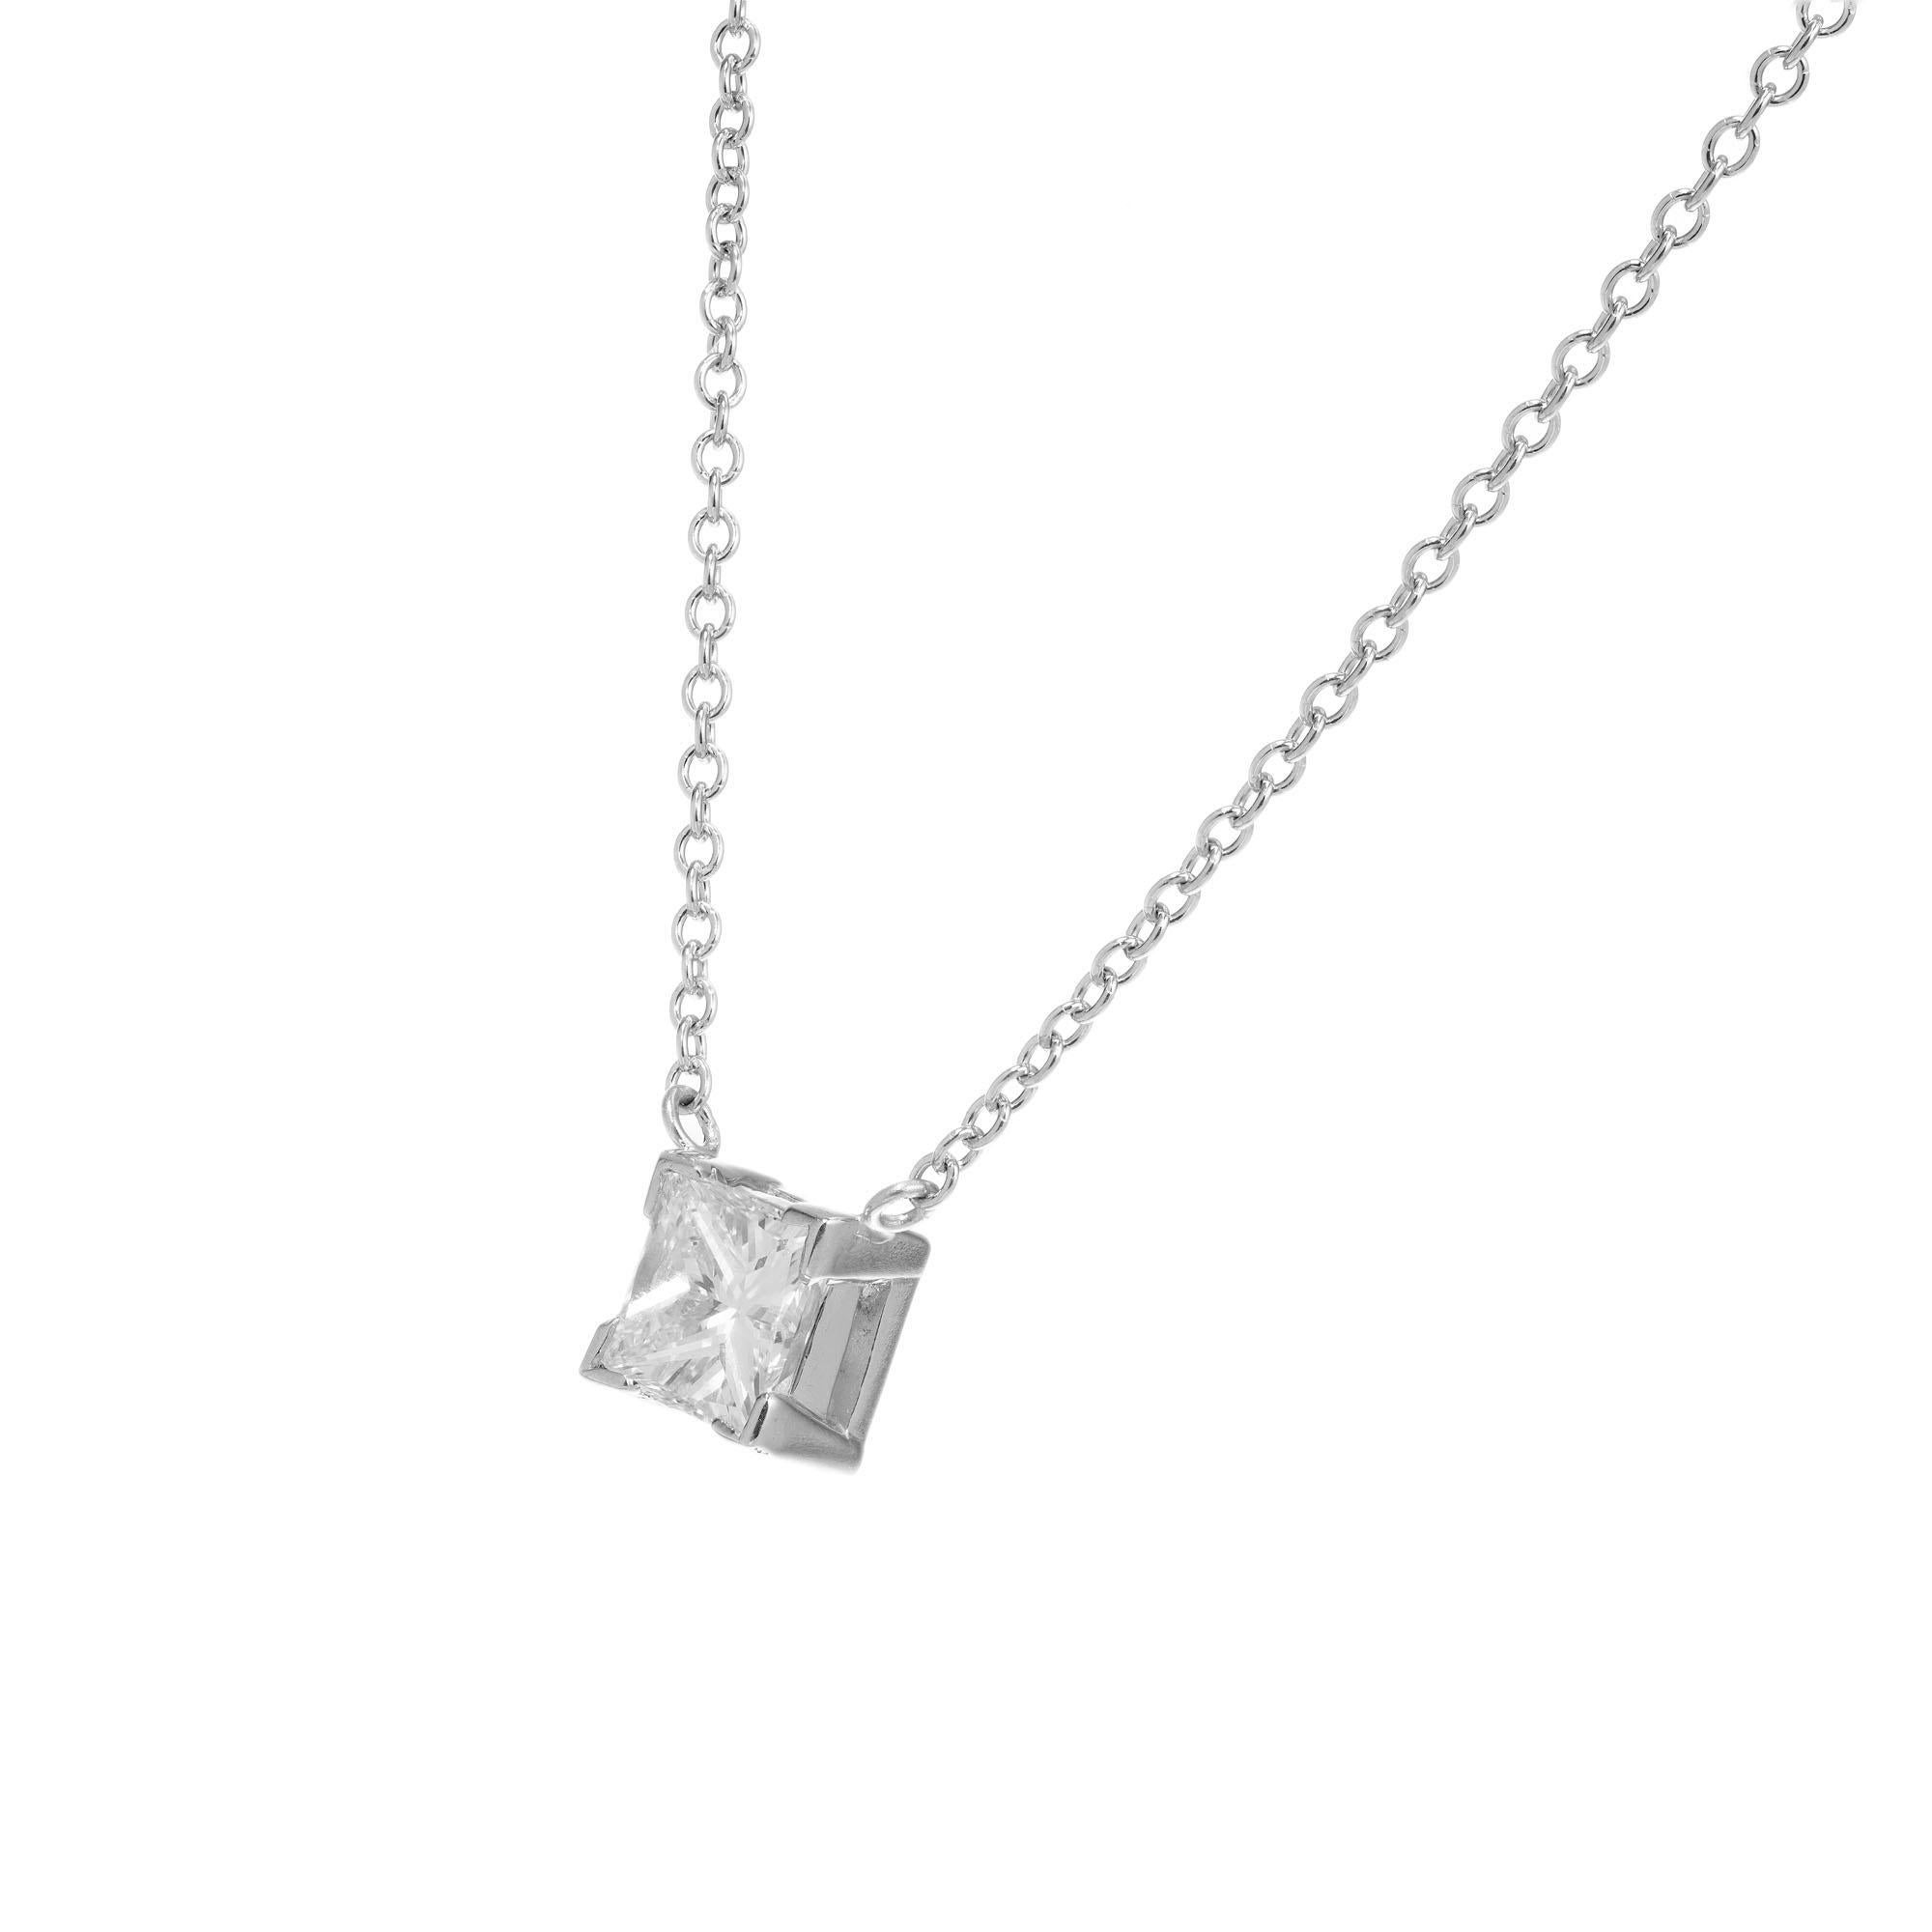 Princess cut diamond pendant in a handmade 14k white gold setting with a 14k white gold 18 inch chain. Created in the Peter Suchy workshop

1 princess cut diamond, G VVS approx. .50ct GIA Certificate # 6204562493
14k white gold 
Stamped: 14k
1.7